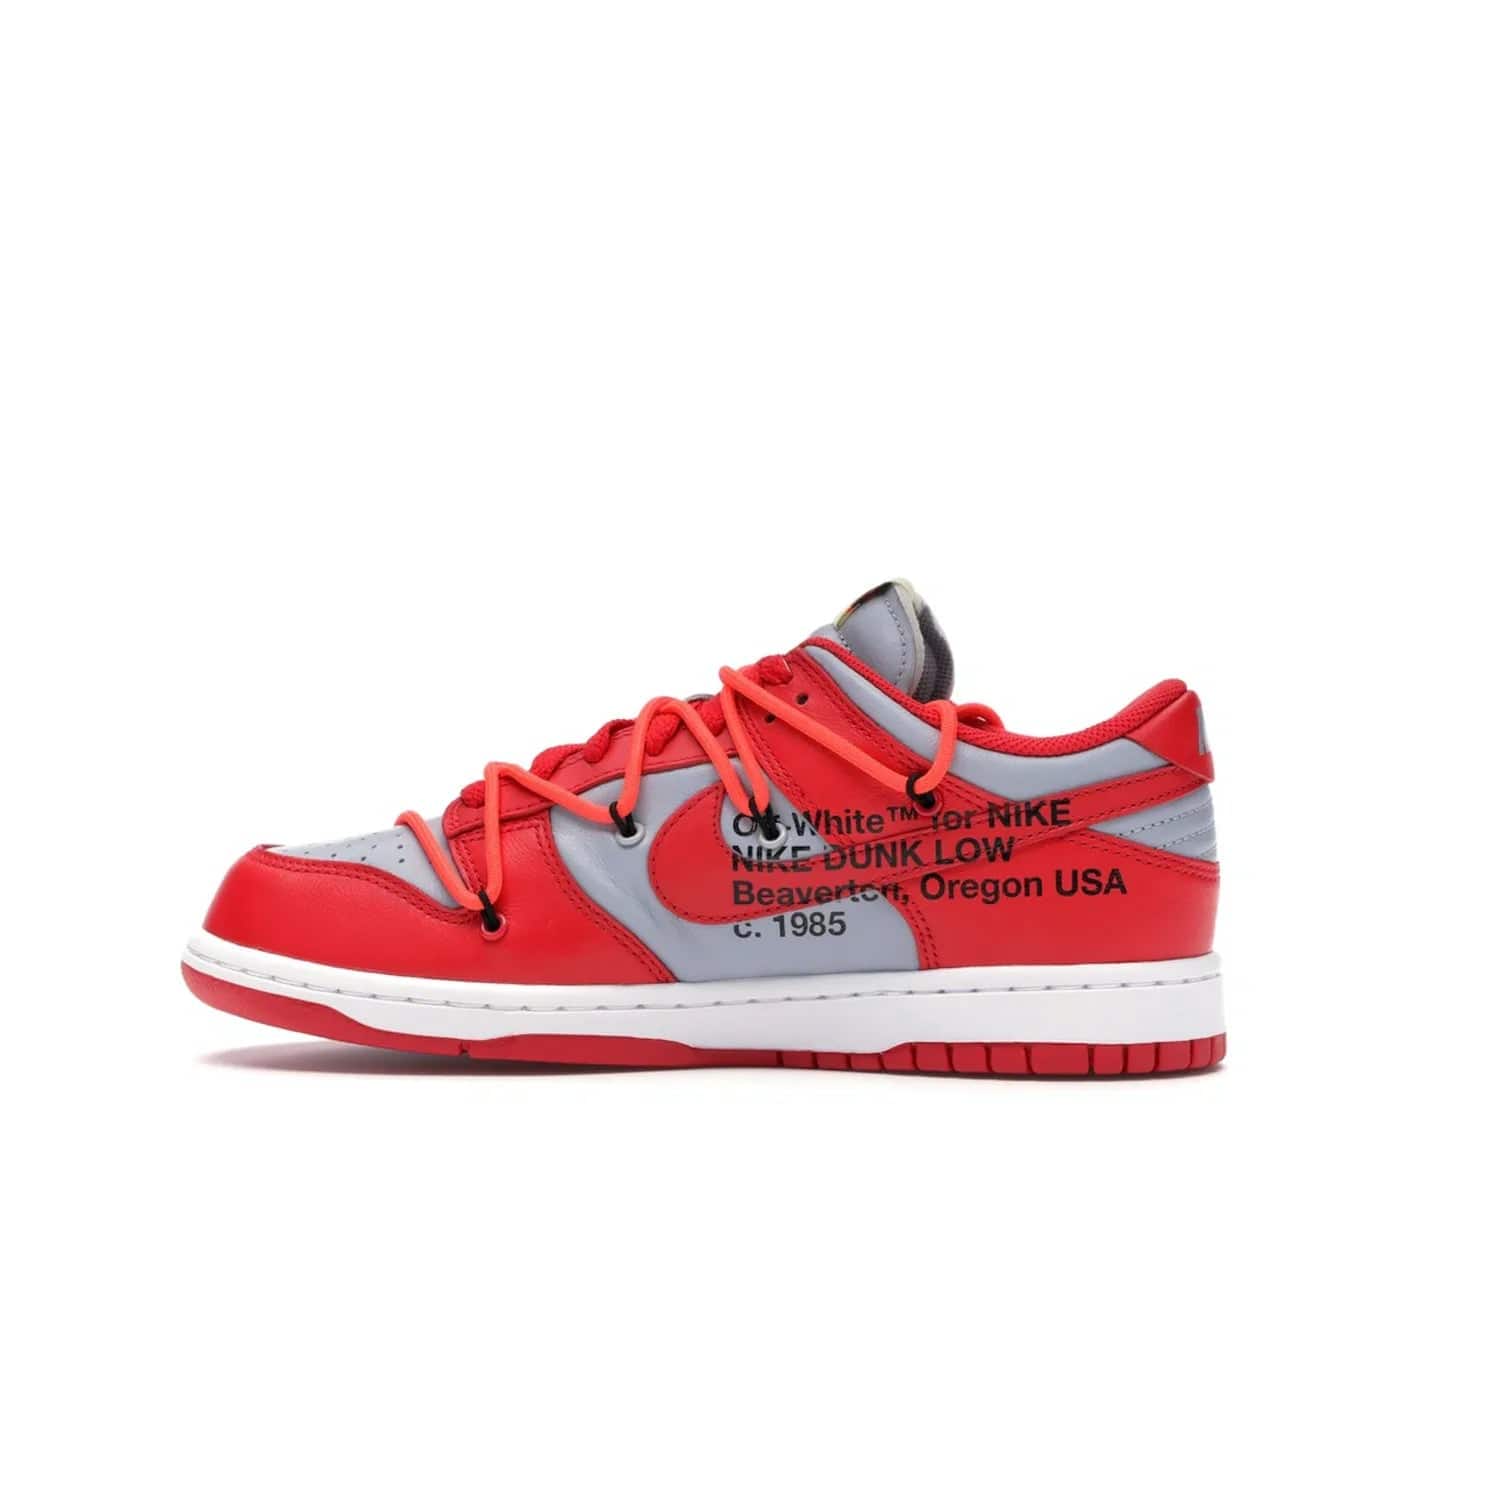 Nike Dunk Low Off-White University Red - Image 20 - Only at www.BallersClubKickz.com - The Nike Dunk Low Off-White University Red offers tribute to classic Nike Basketball silhouettes. Features include wolf grey leather, university red overlays, zip-ties, and Off-White text. Perfect for any sneaker fan, these stylish sneakers released in December of 2019.